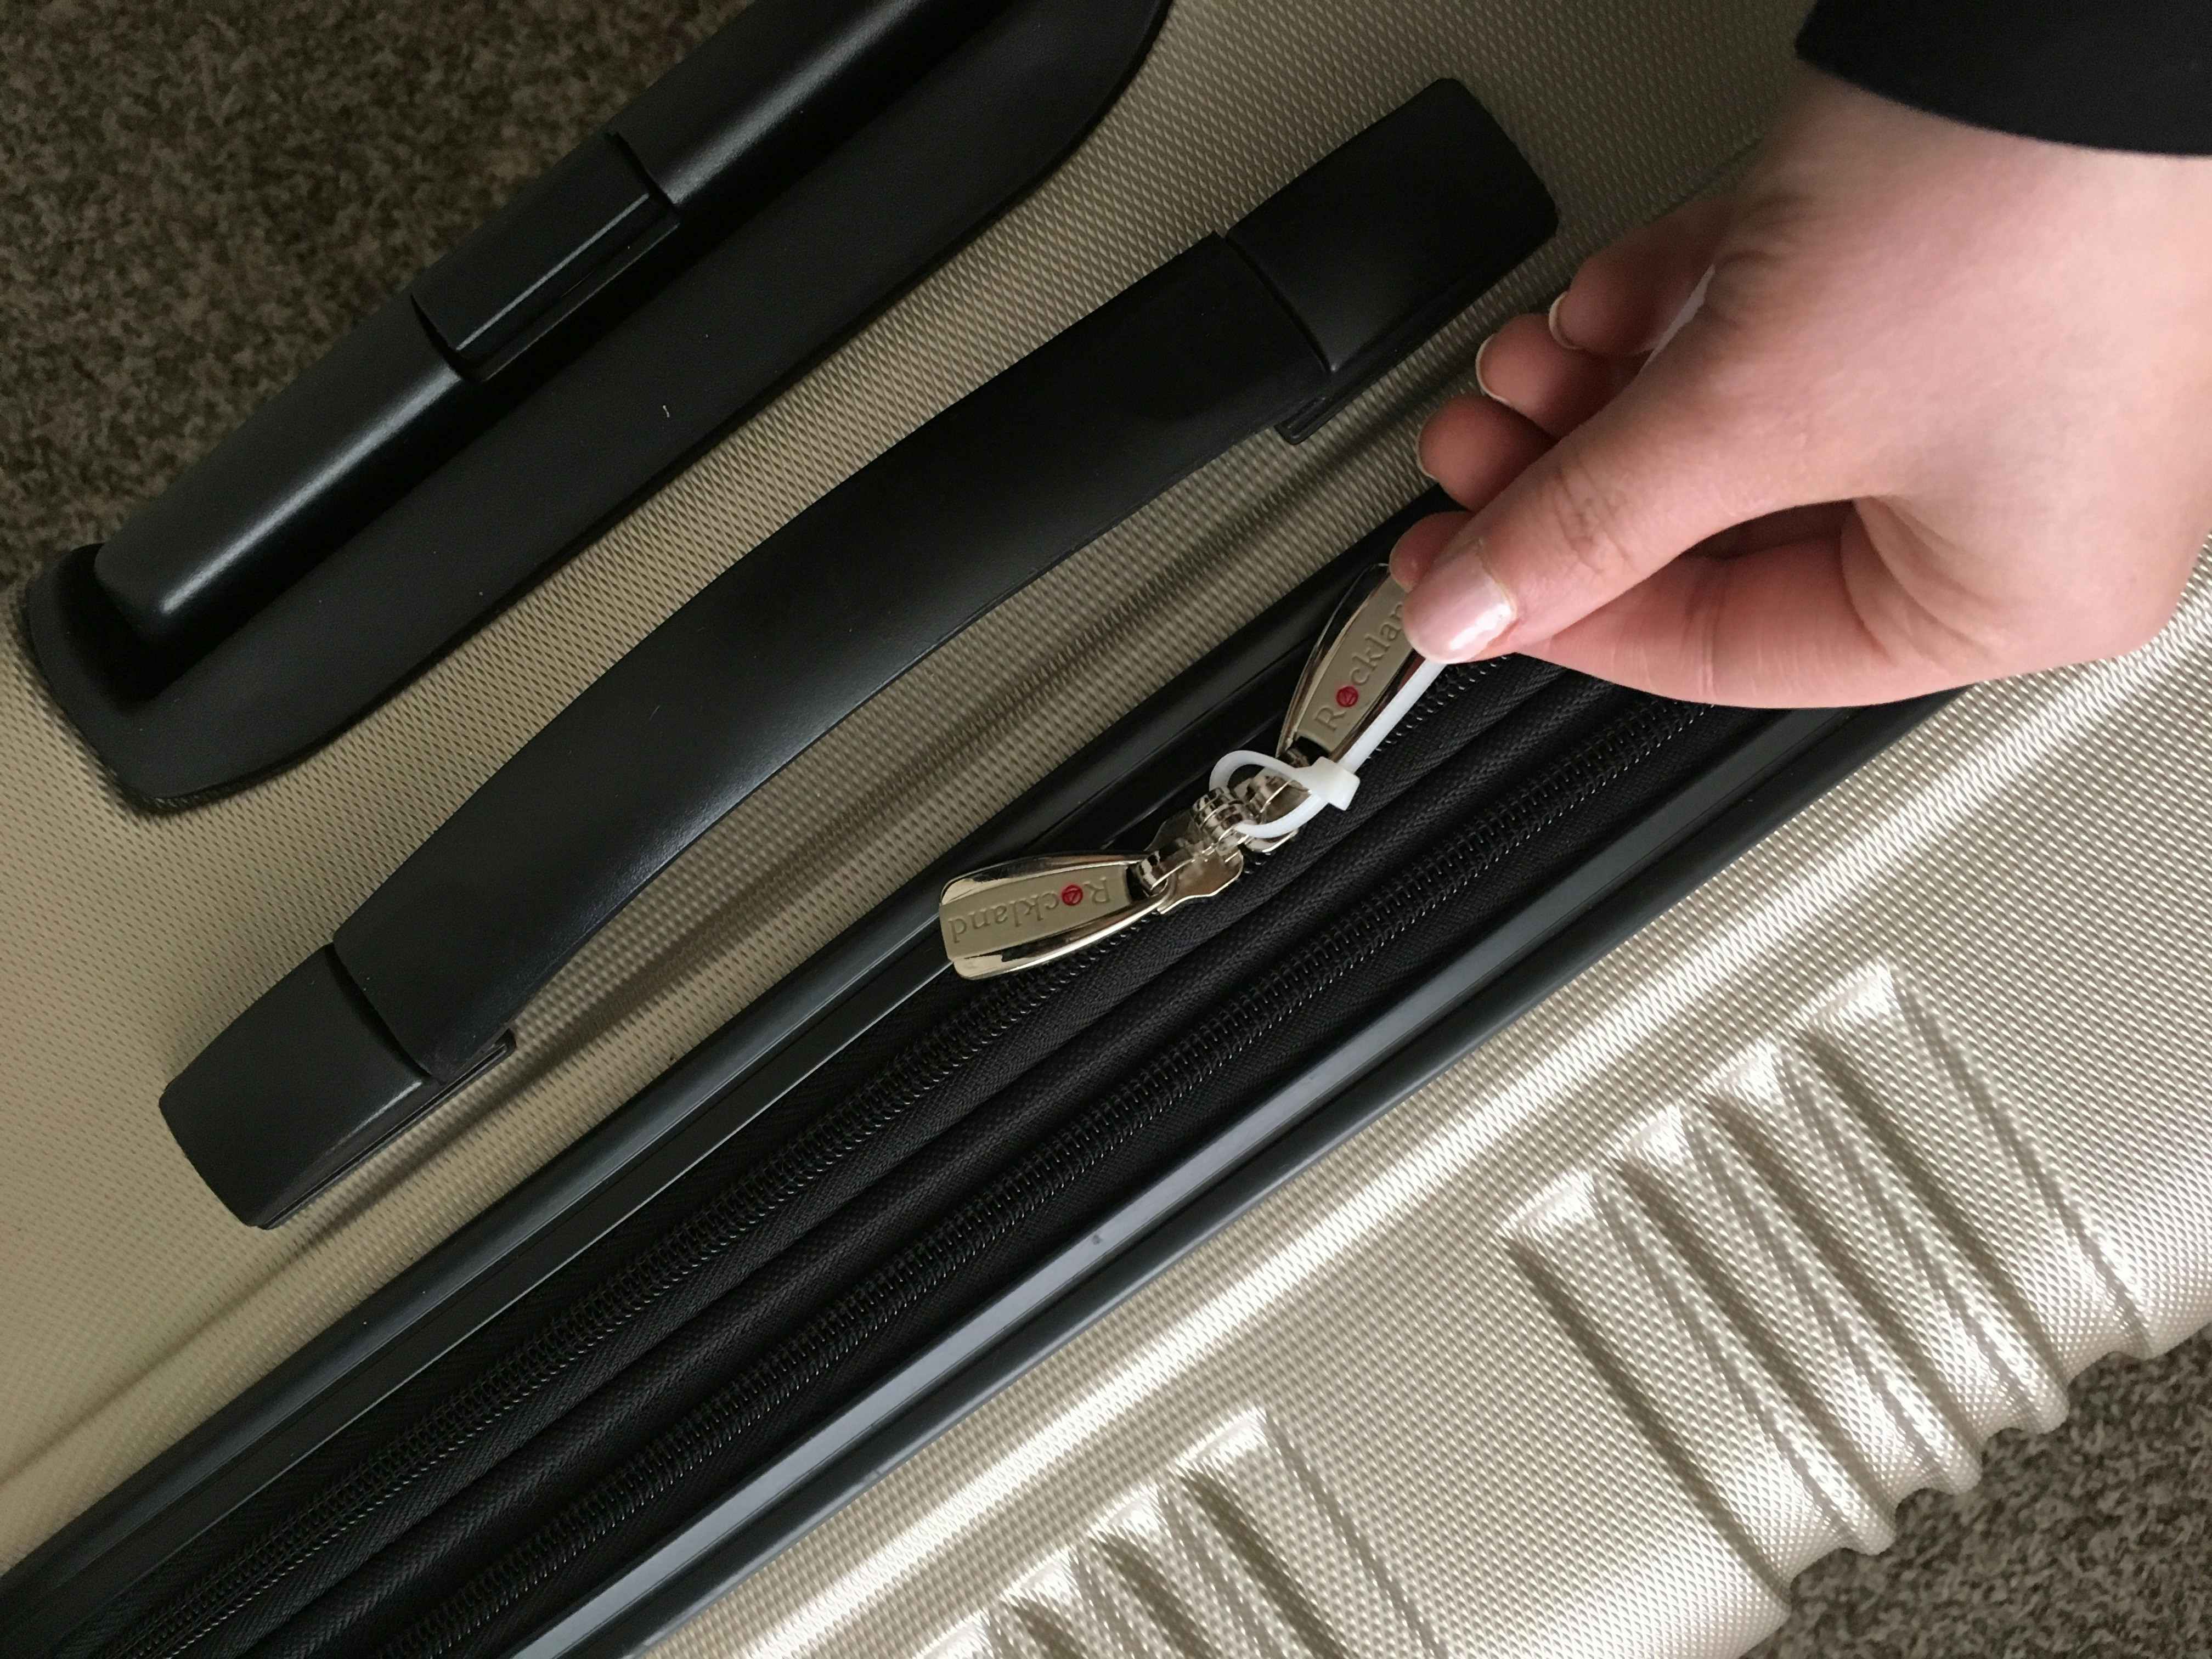 Lock and secure your suitcase while traveling.